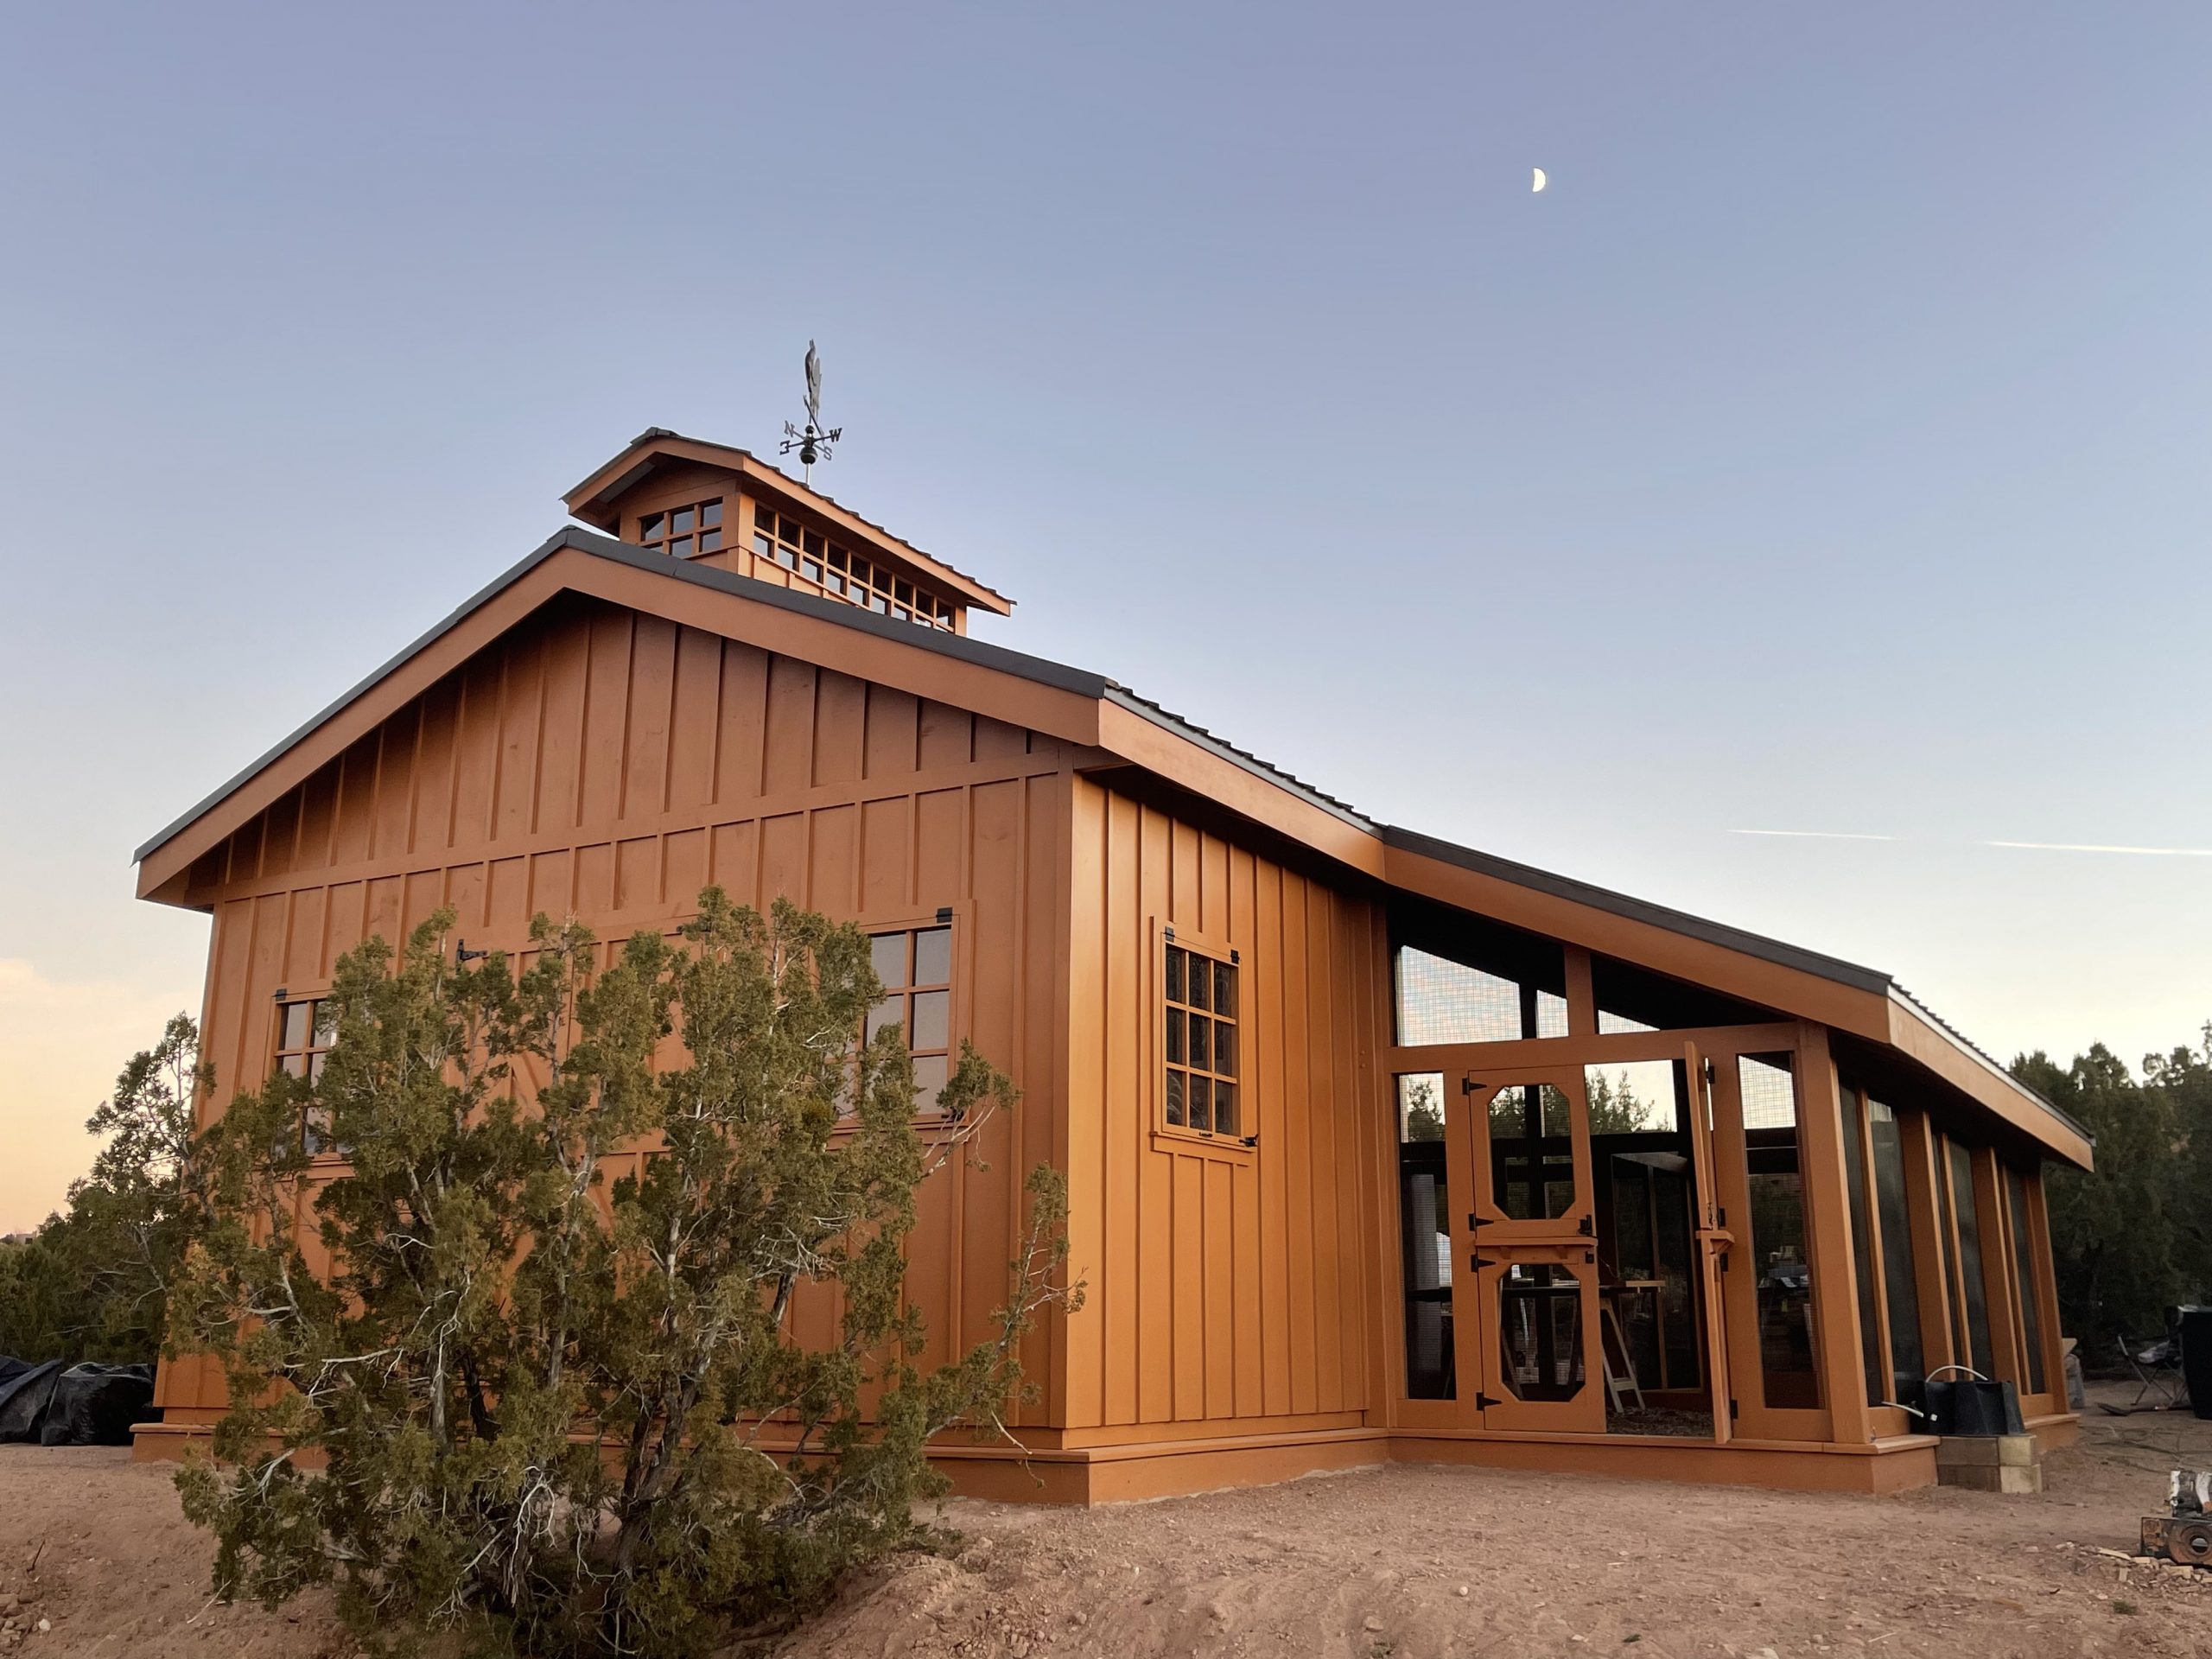 Custom Coop in Santa Fe, NM built on site with local materials